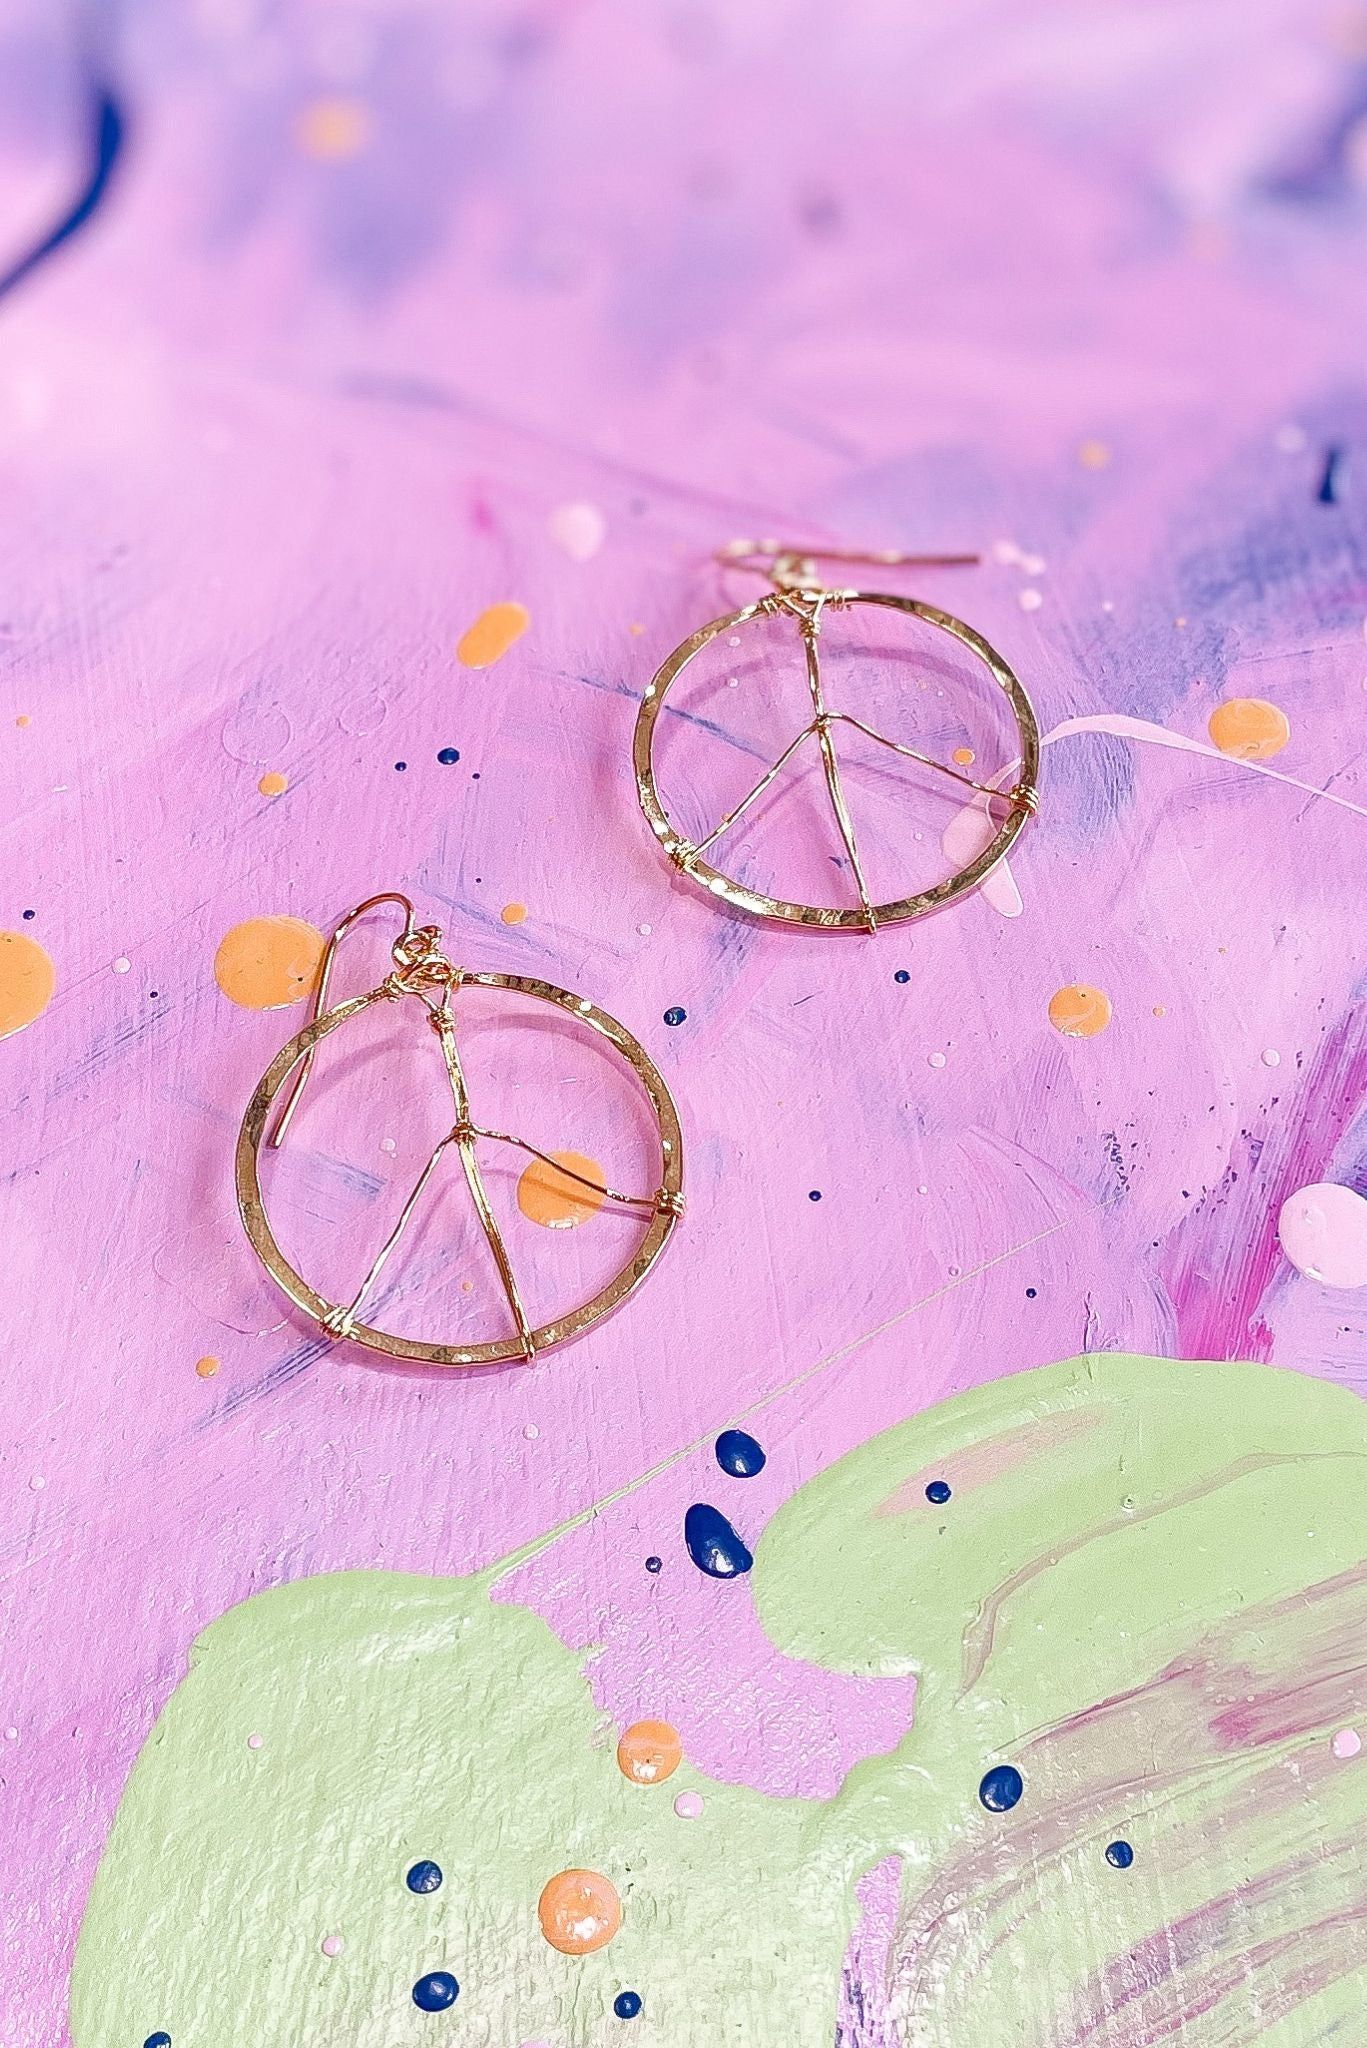 A pair of gold peace earrings on top - Peace